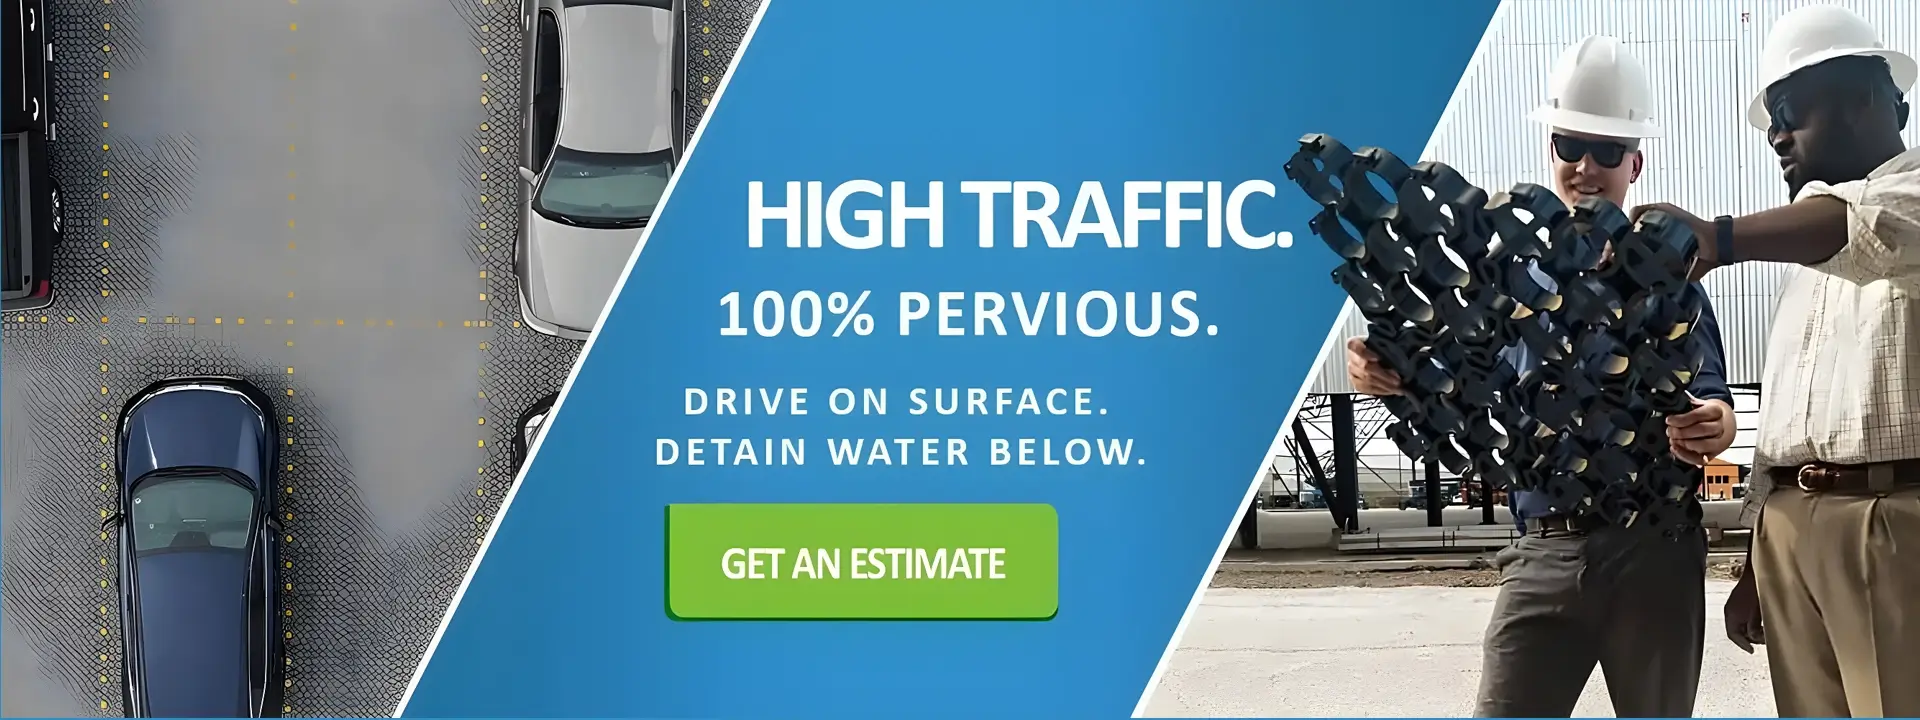 A banner ad for a water company.